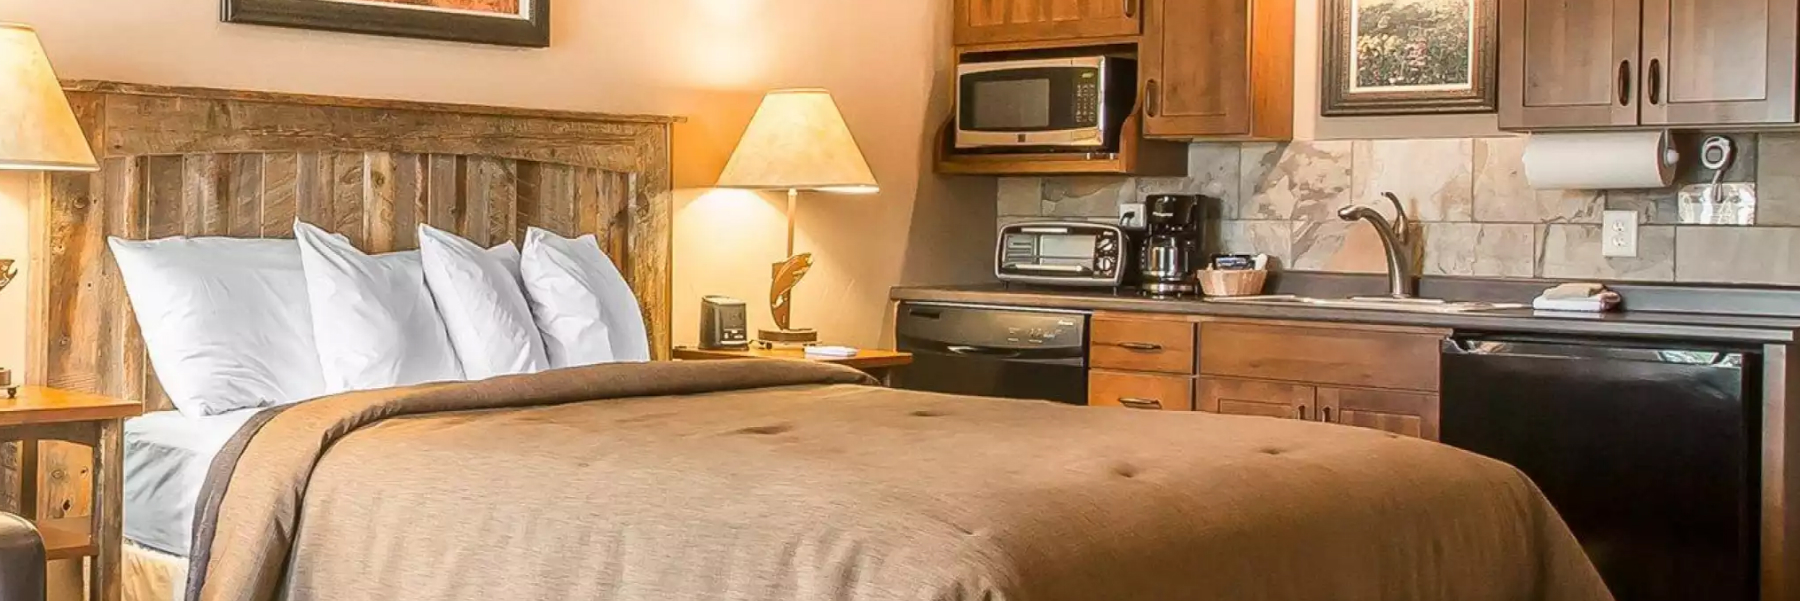 Rooms at Yellowstone Valley Lodge & Grill - South Livingston, Montana